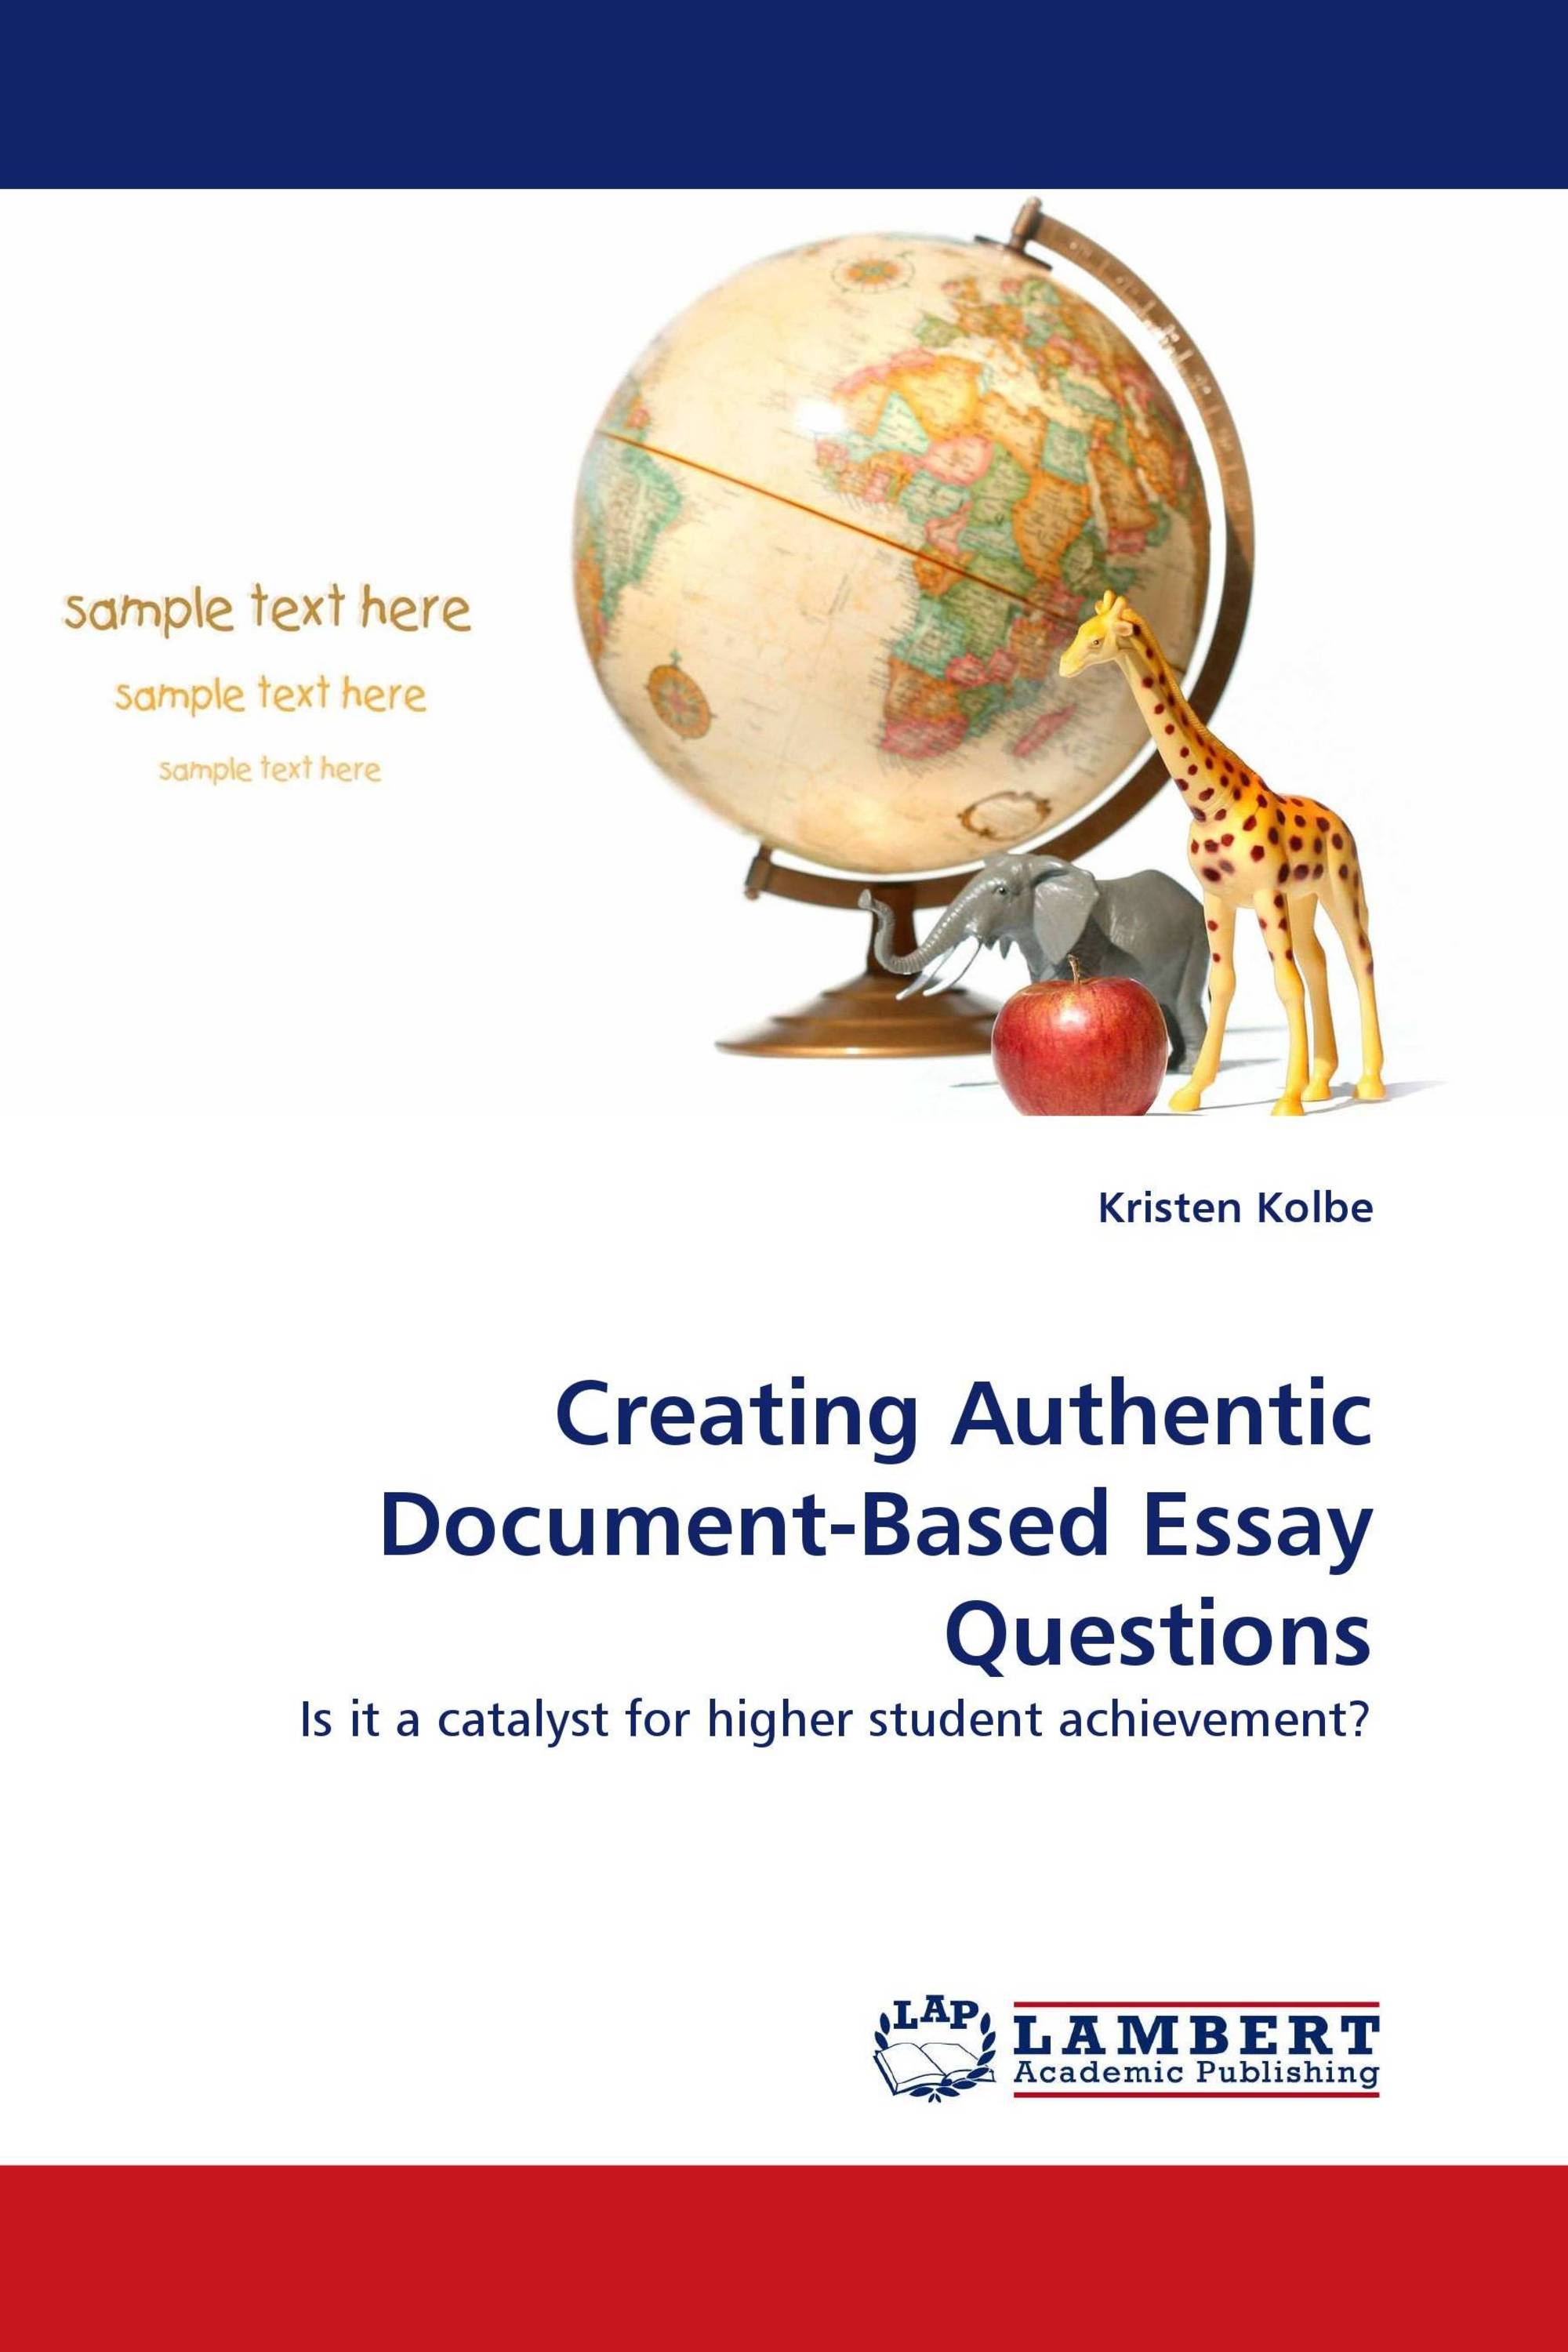 Creating Authentic Document-Based Essay Questions